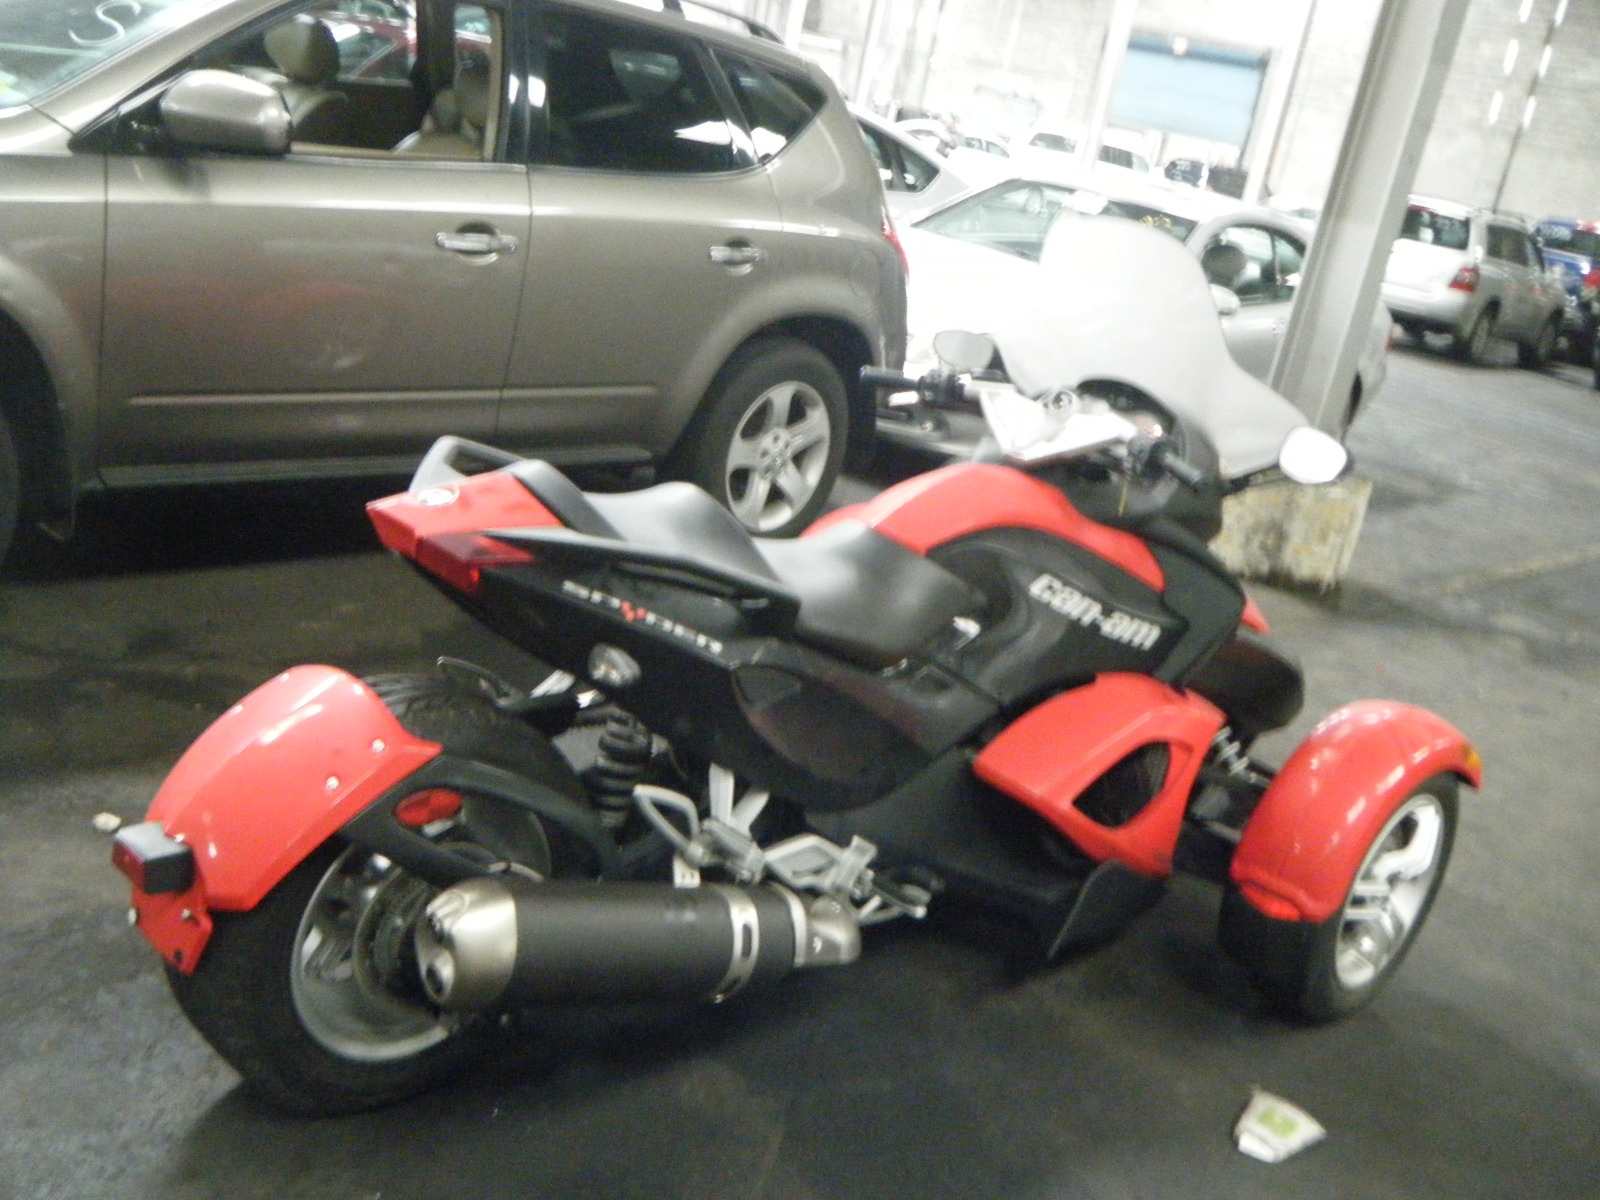 2009 Can-Am Spyder Motorcycle for sale in Brooklyn, NY